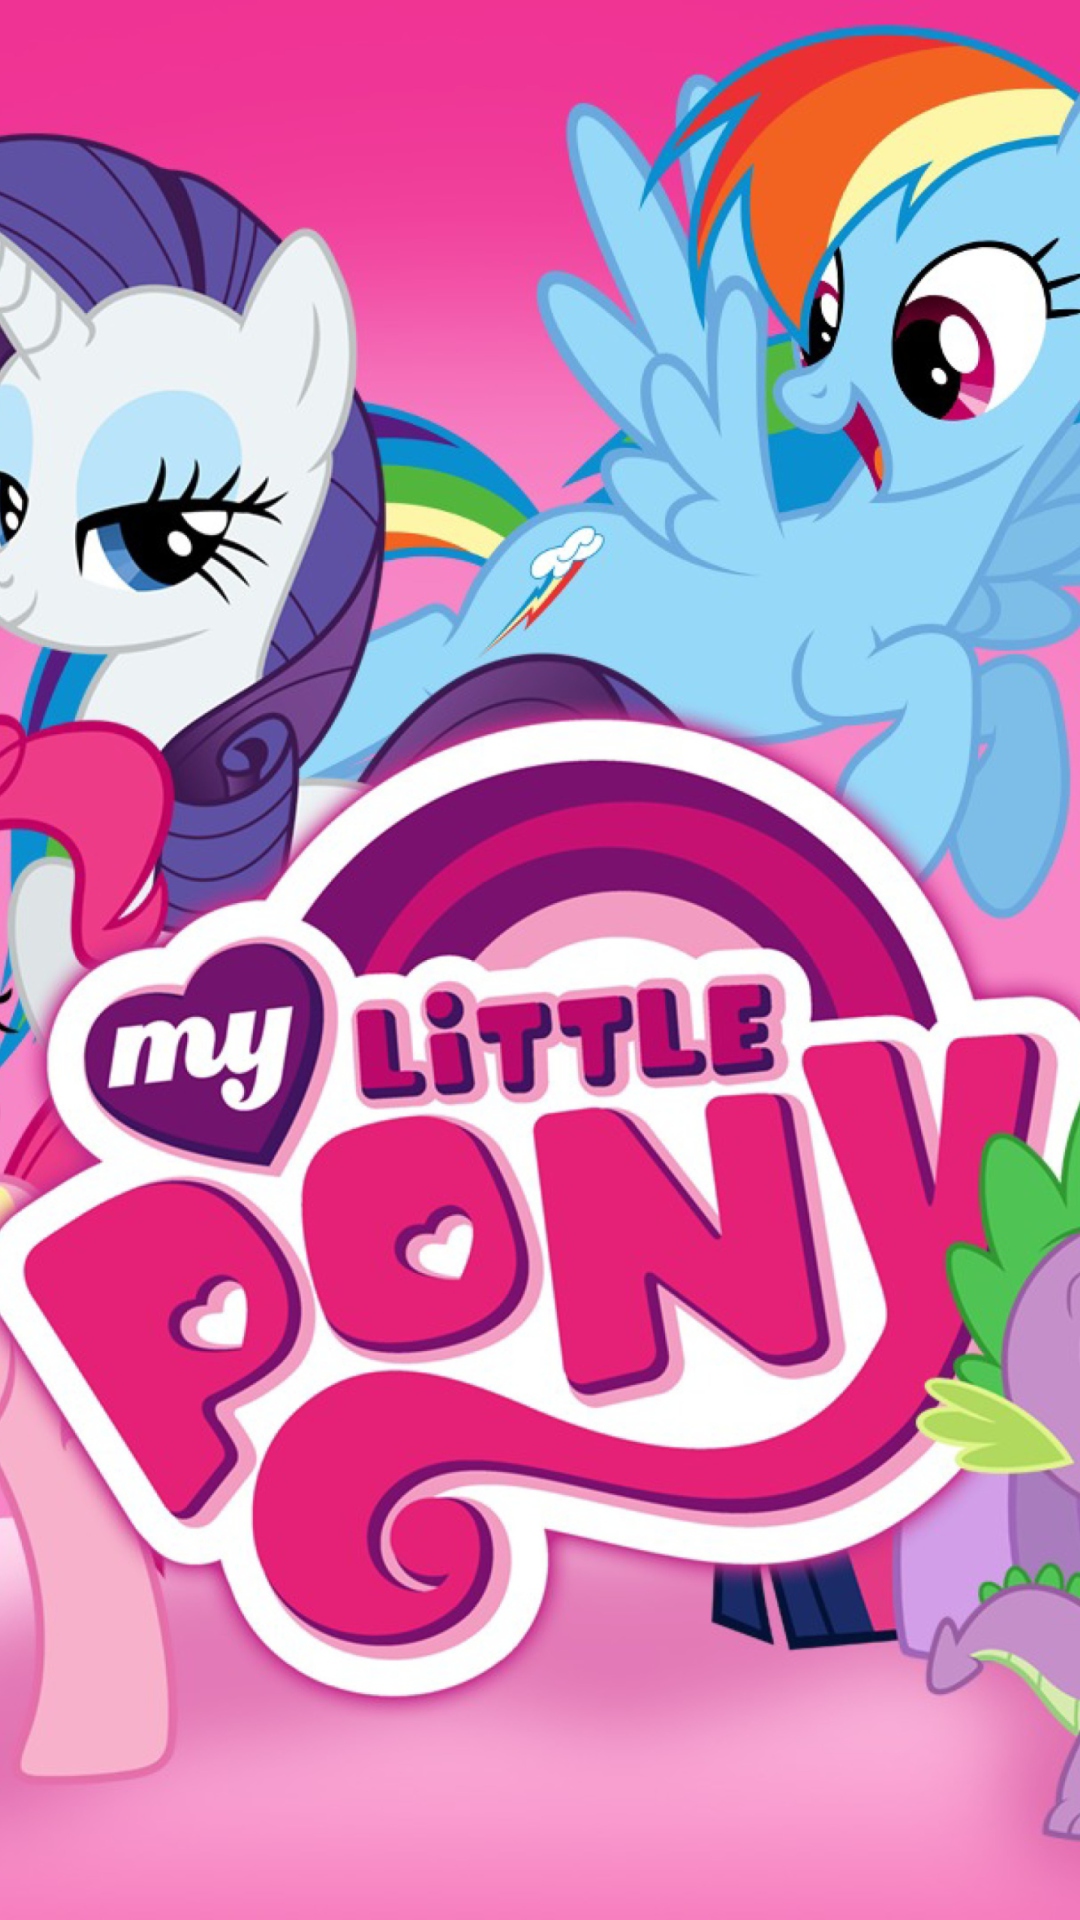 My Little Pony Wallpaper For Iphone 6 Plus